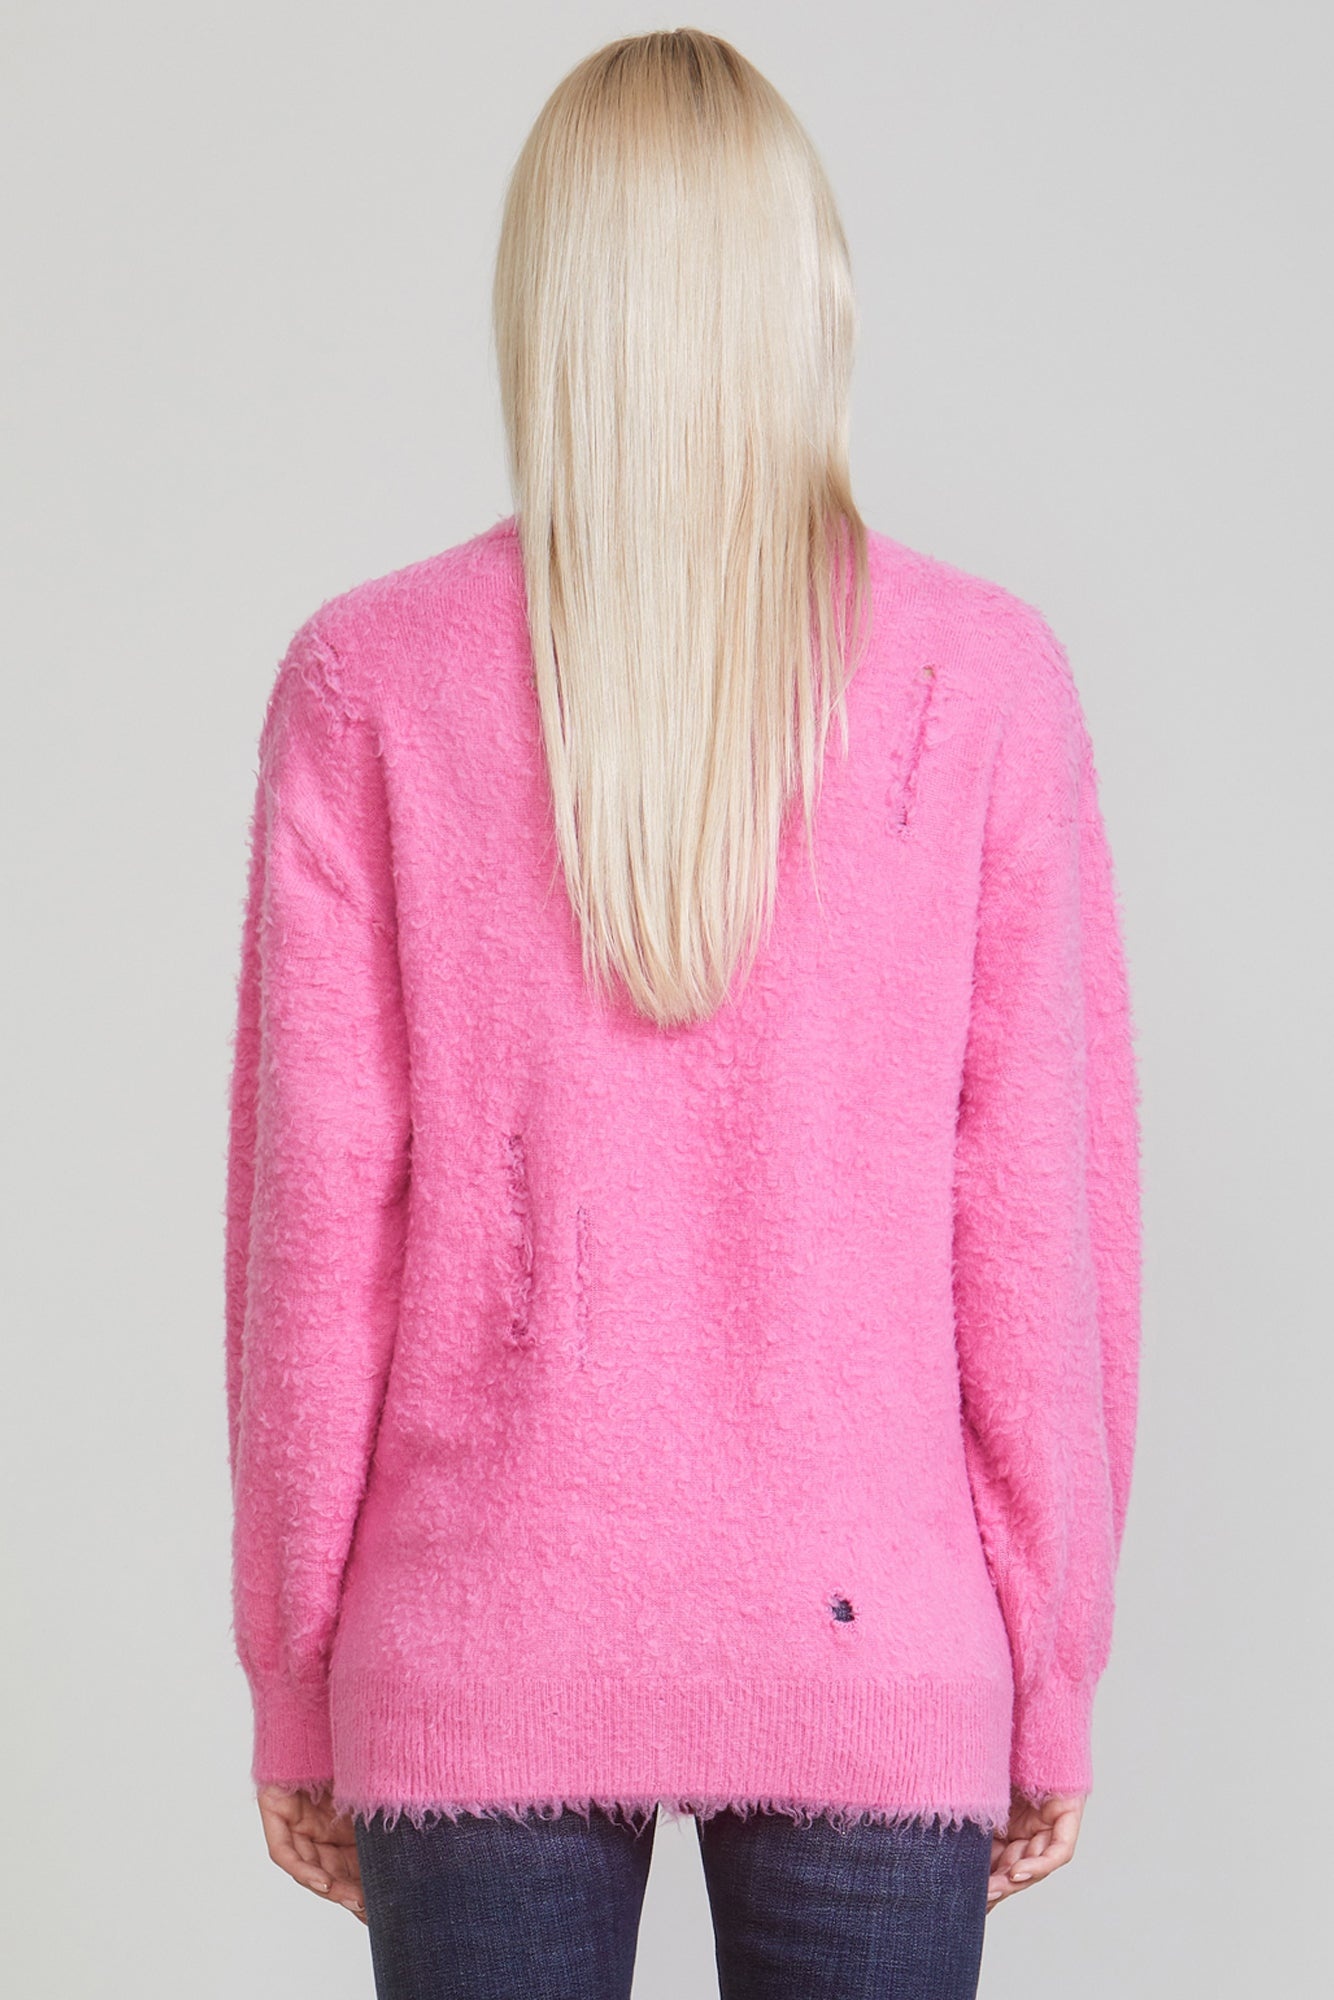 R13 SHAGGY OVERSIZED DISTRESSED EDGE CARDIGAN - PINK | REVERSIBLE